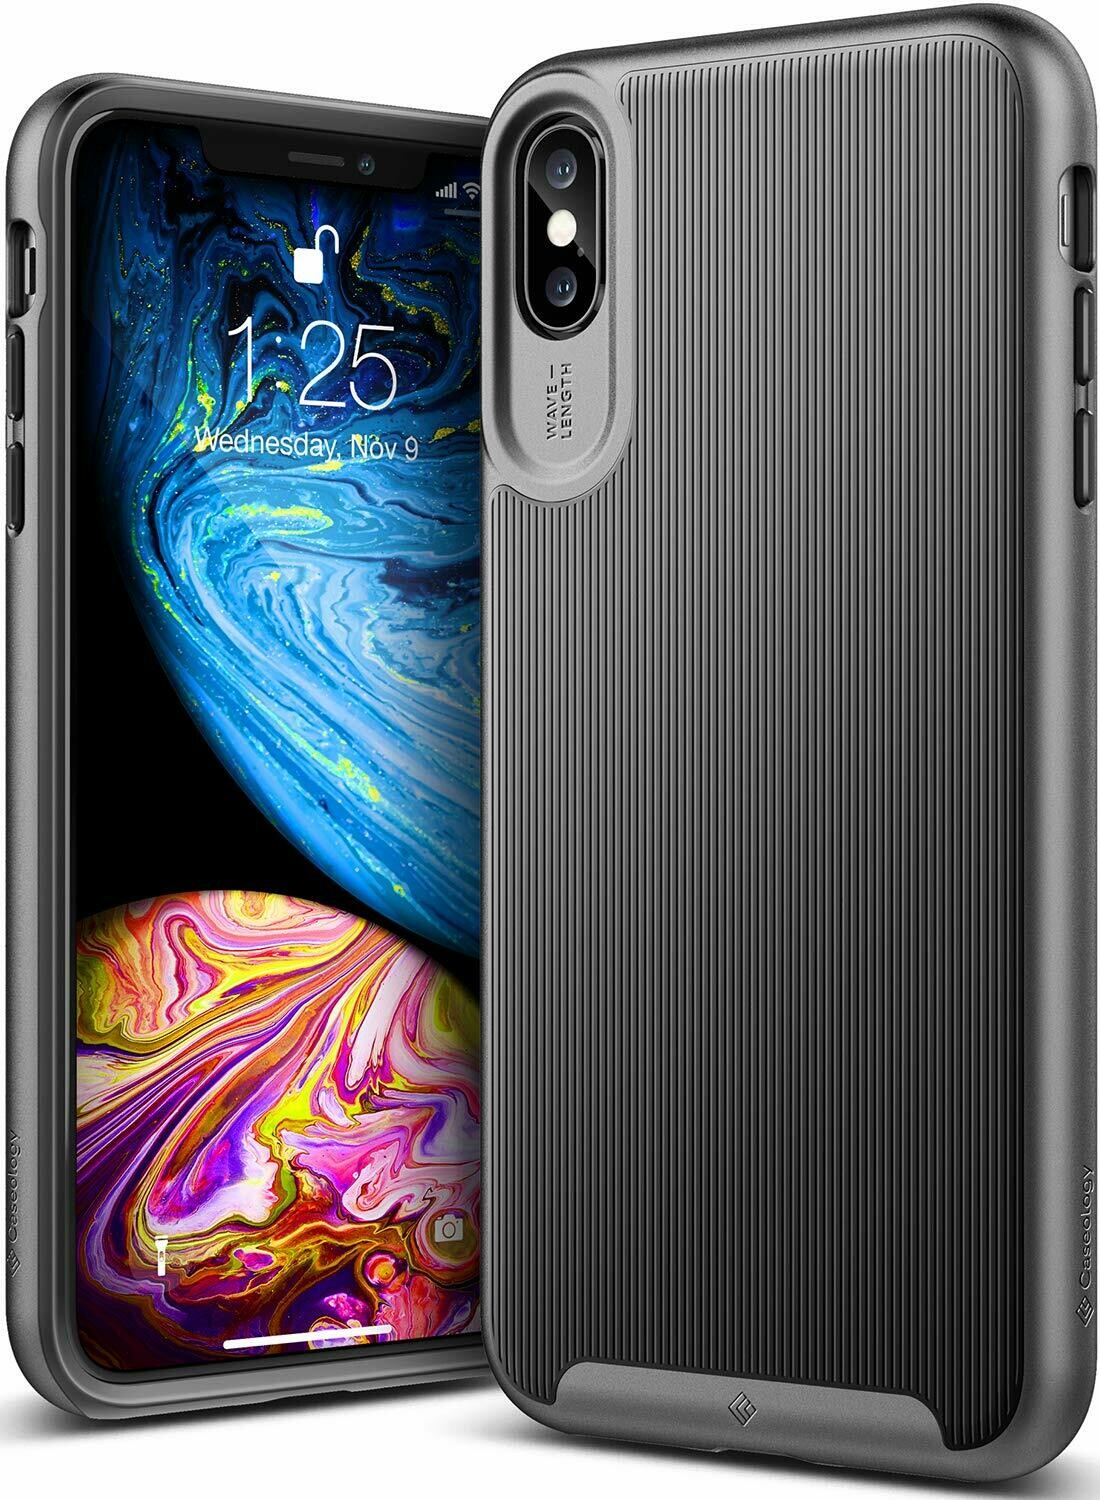 Stylish Grip Design Caseology Wavelength Case for iPhone X, Xs, XR and Xs Max together with 3D Full Cover Glass Protector